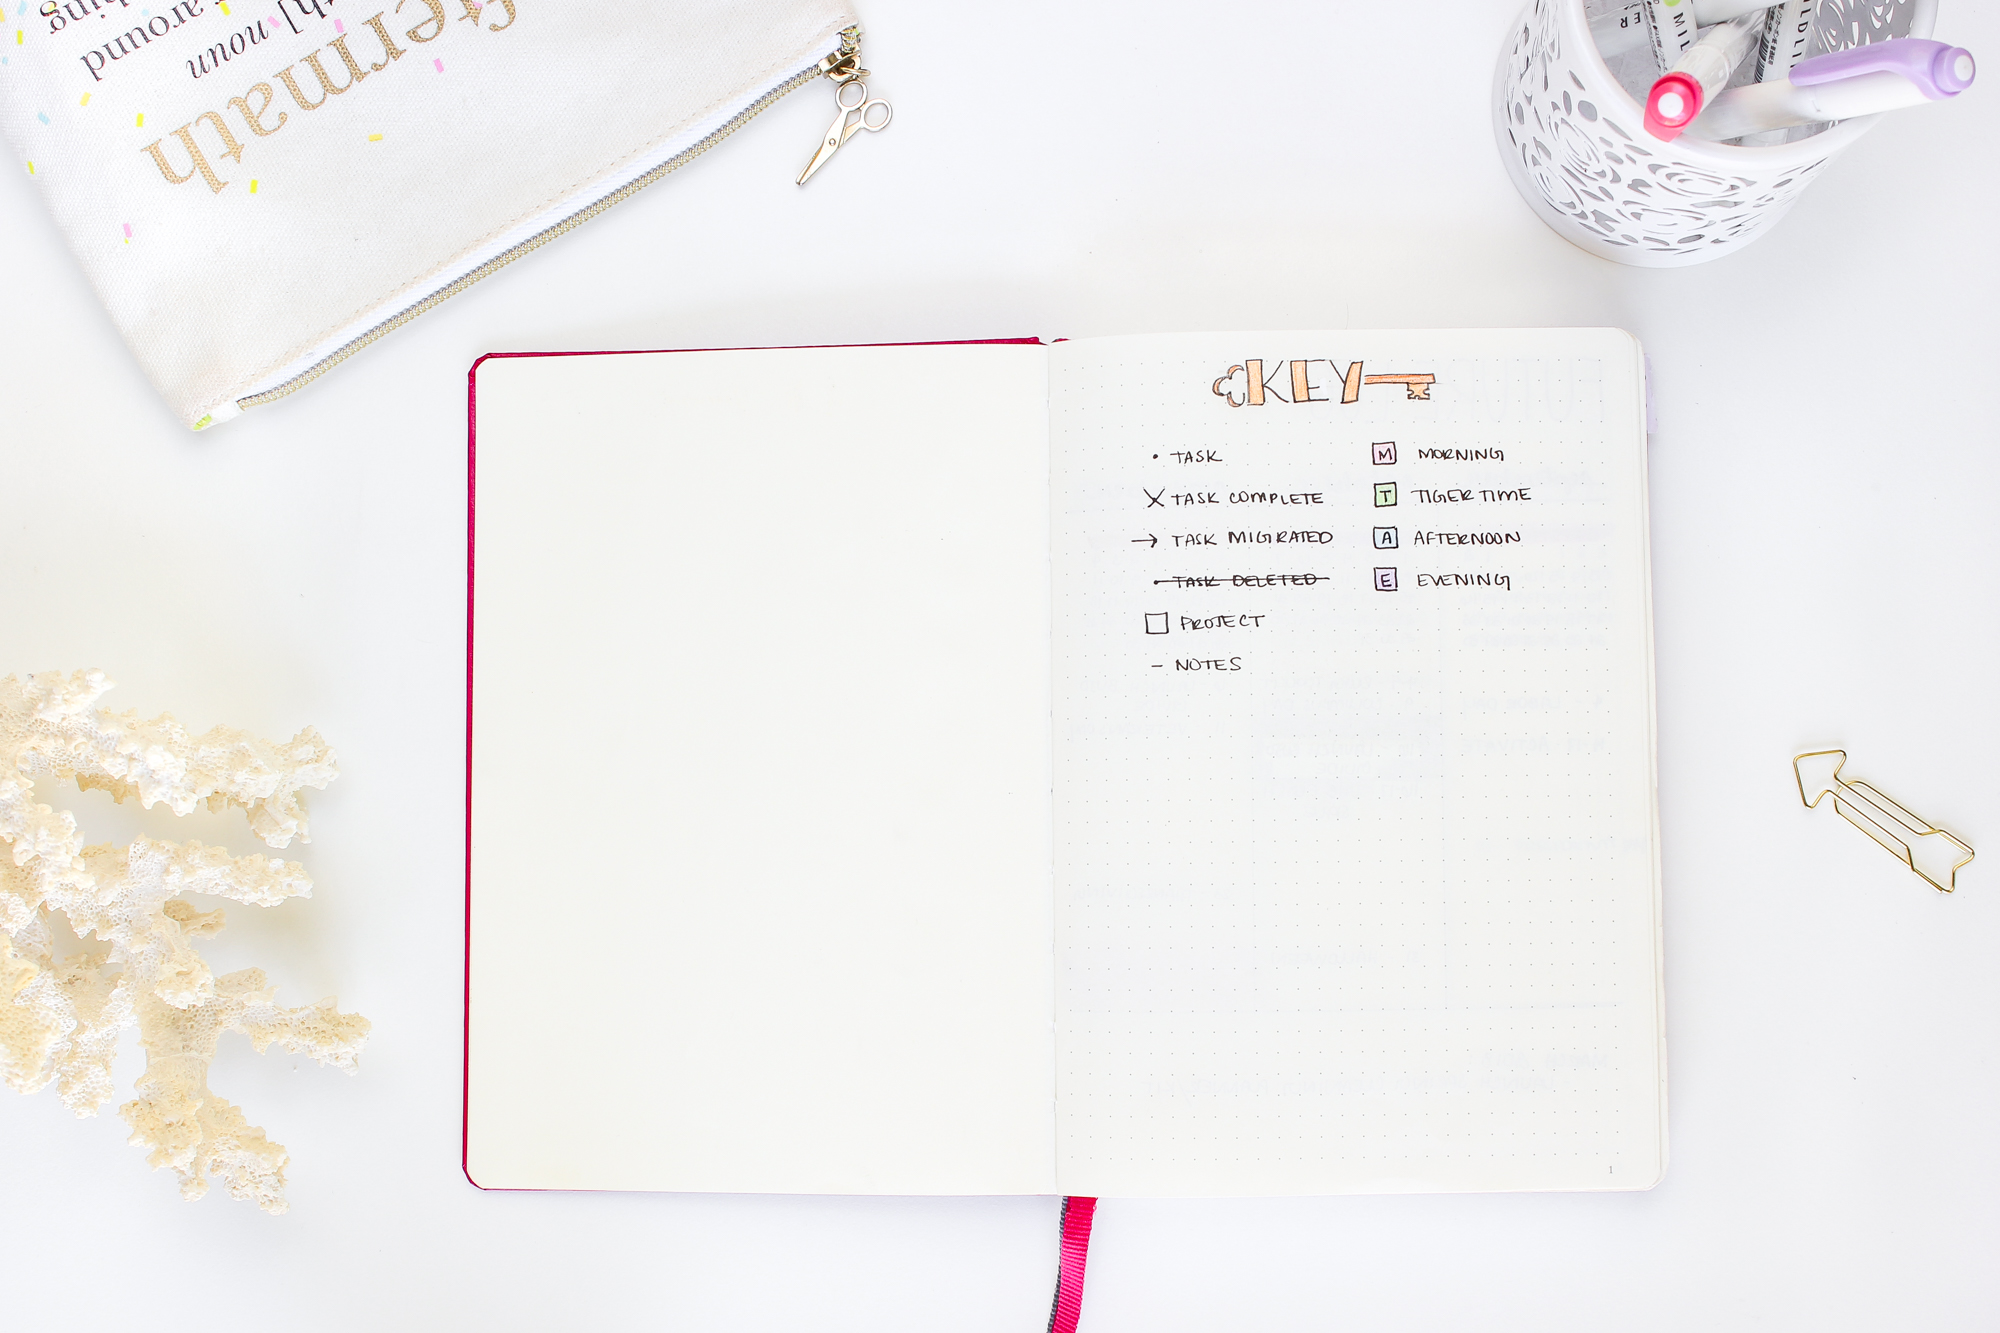 The bullet journal key is your personal code to save time when you do rapid logging of tasks and progress